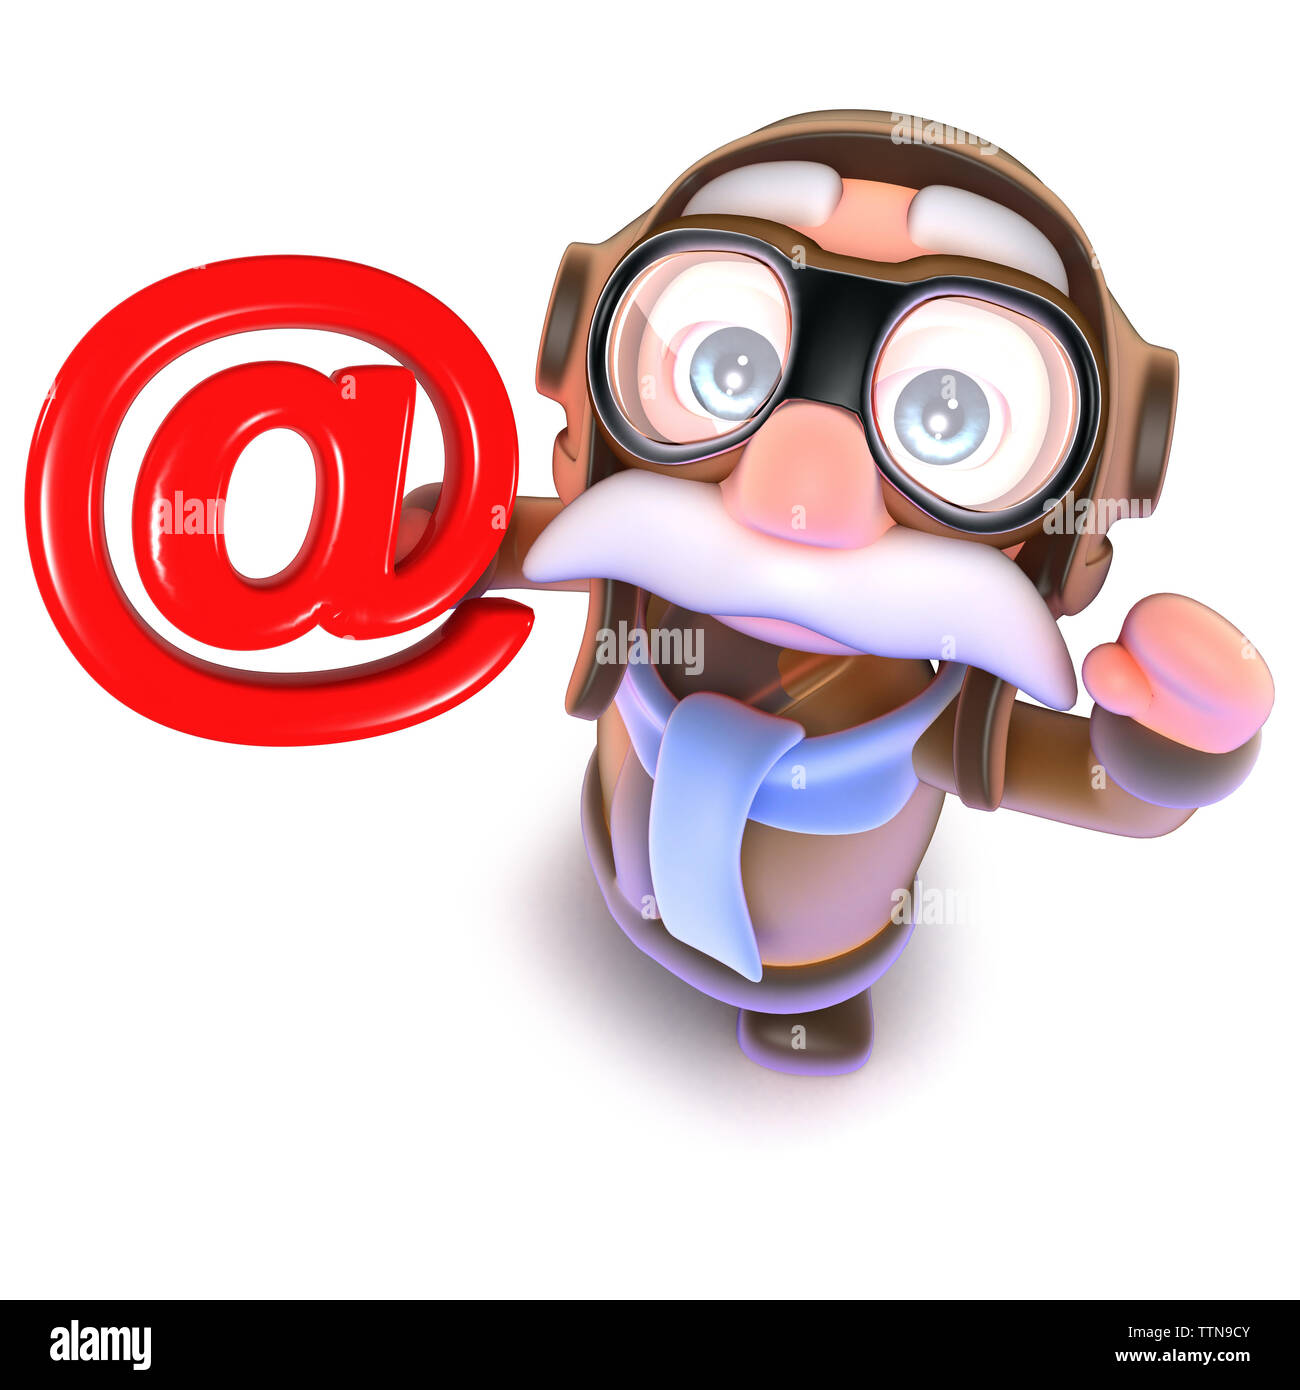 3d render of a funny cartoon pilot airman character holding an email address symbol Stock Photo